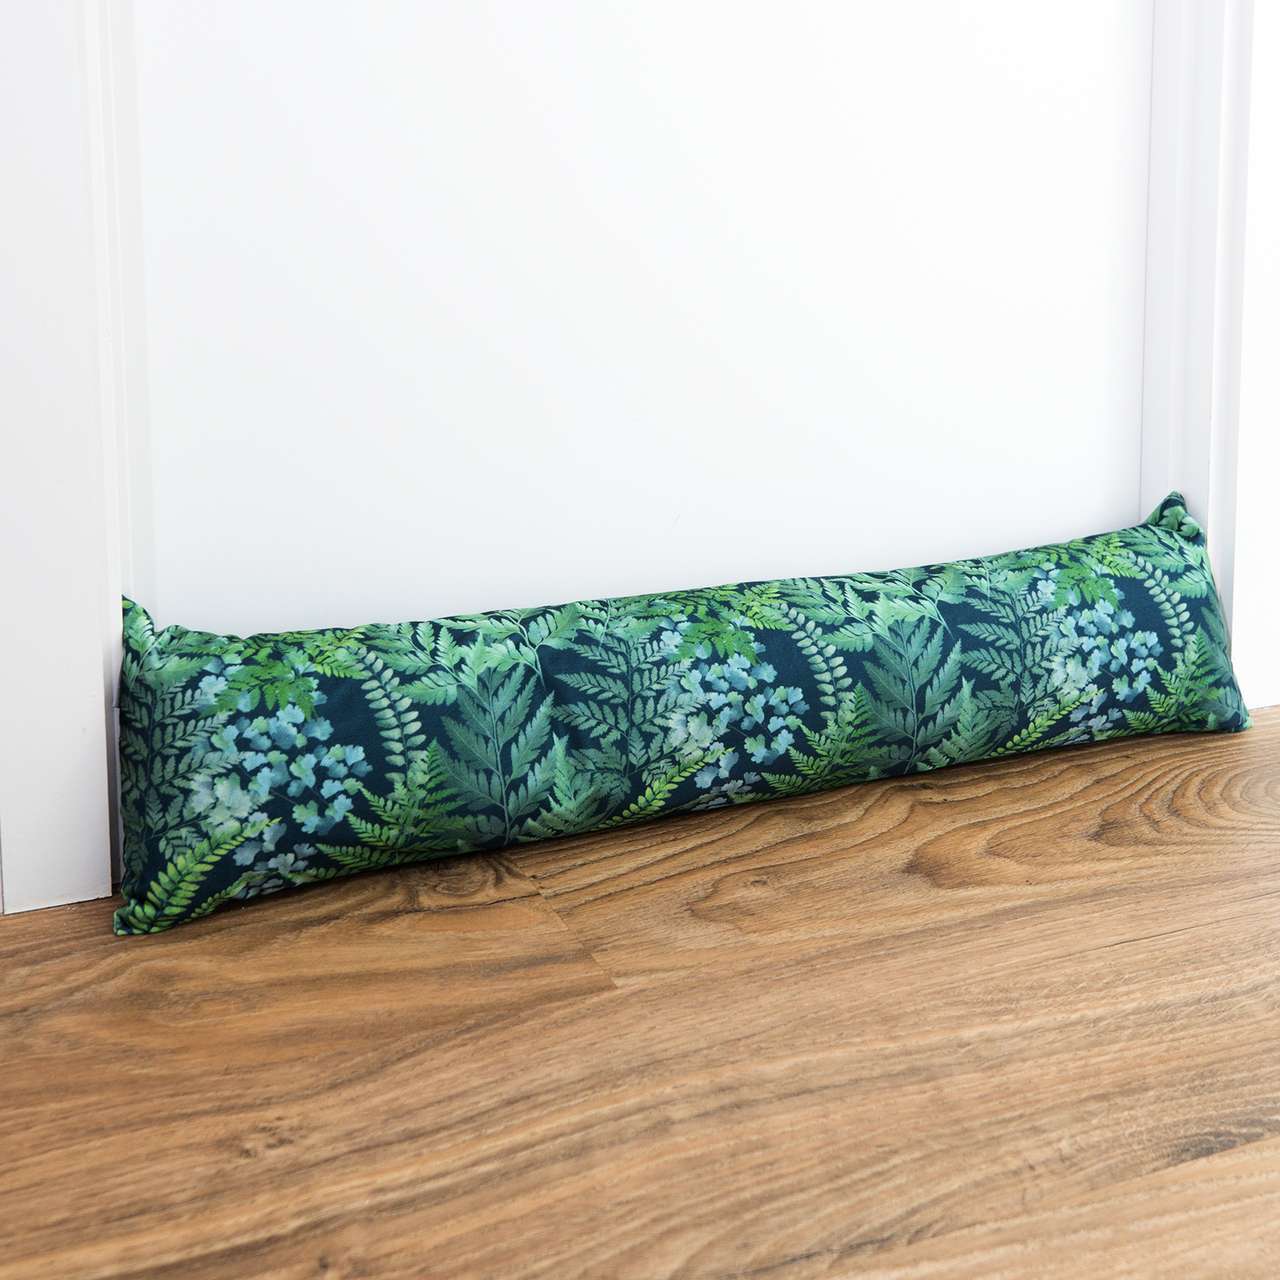 Celina Digby Luxury Velvet Draught Excluder – Ferns (Available in 2 Sizes) Standard (85cm length)